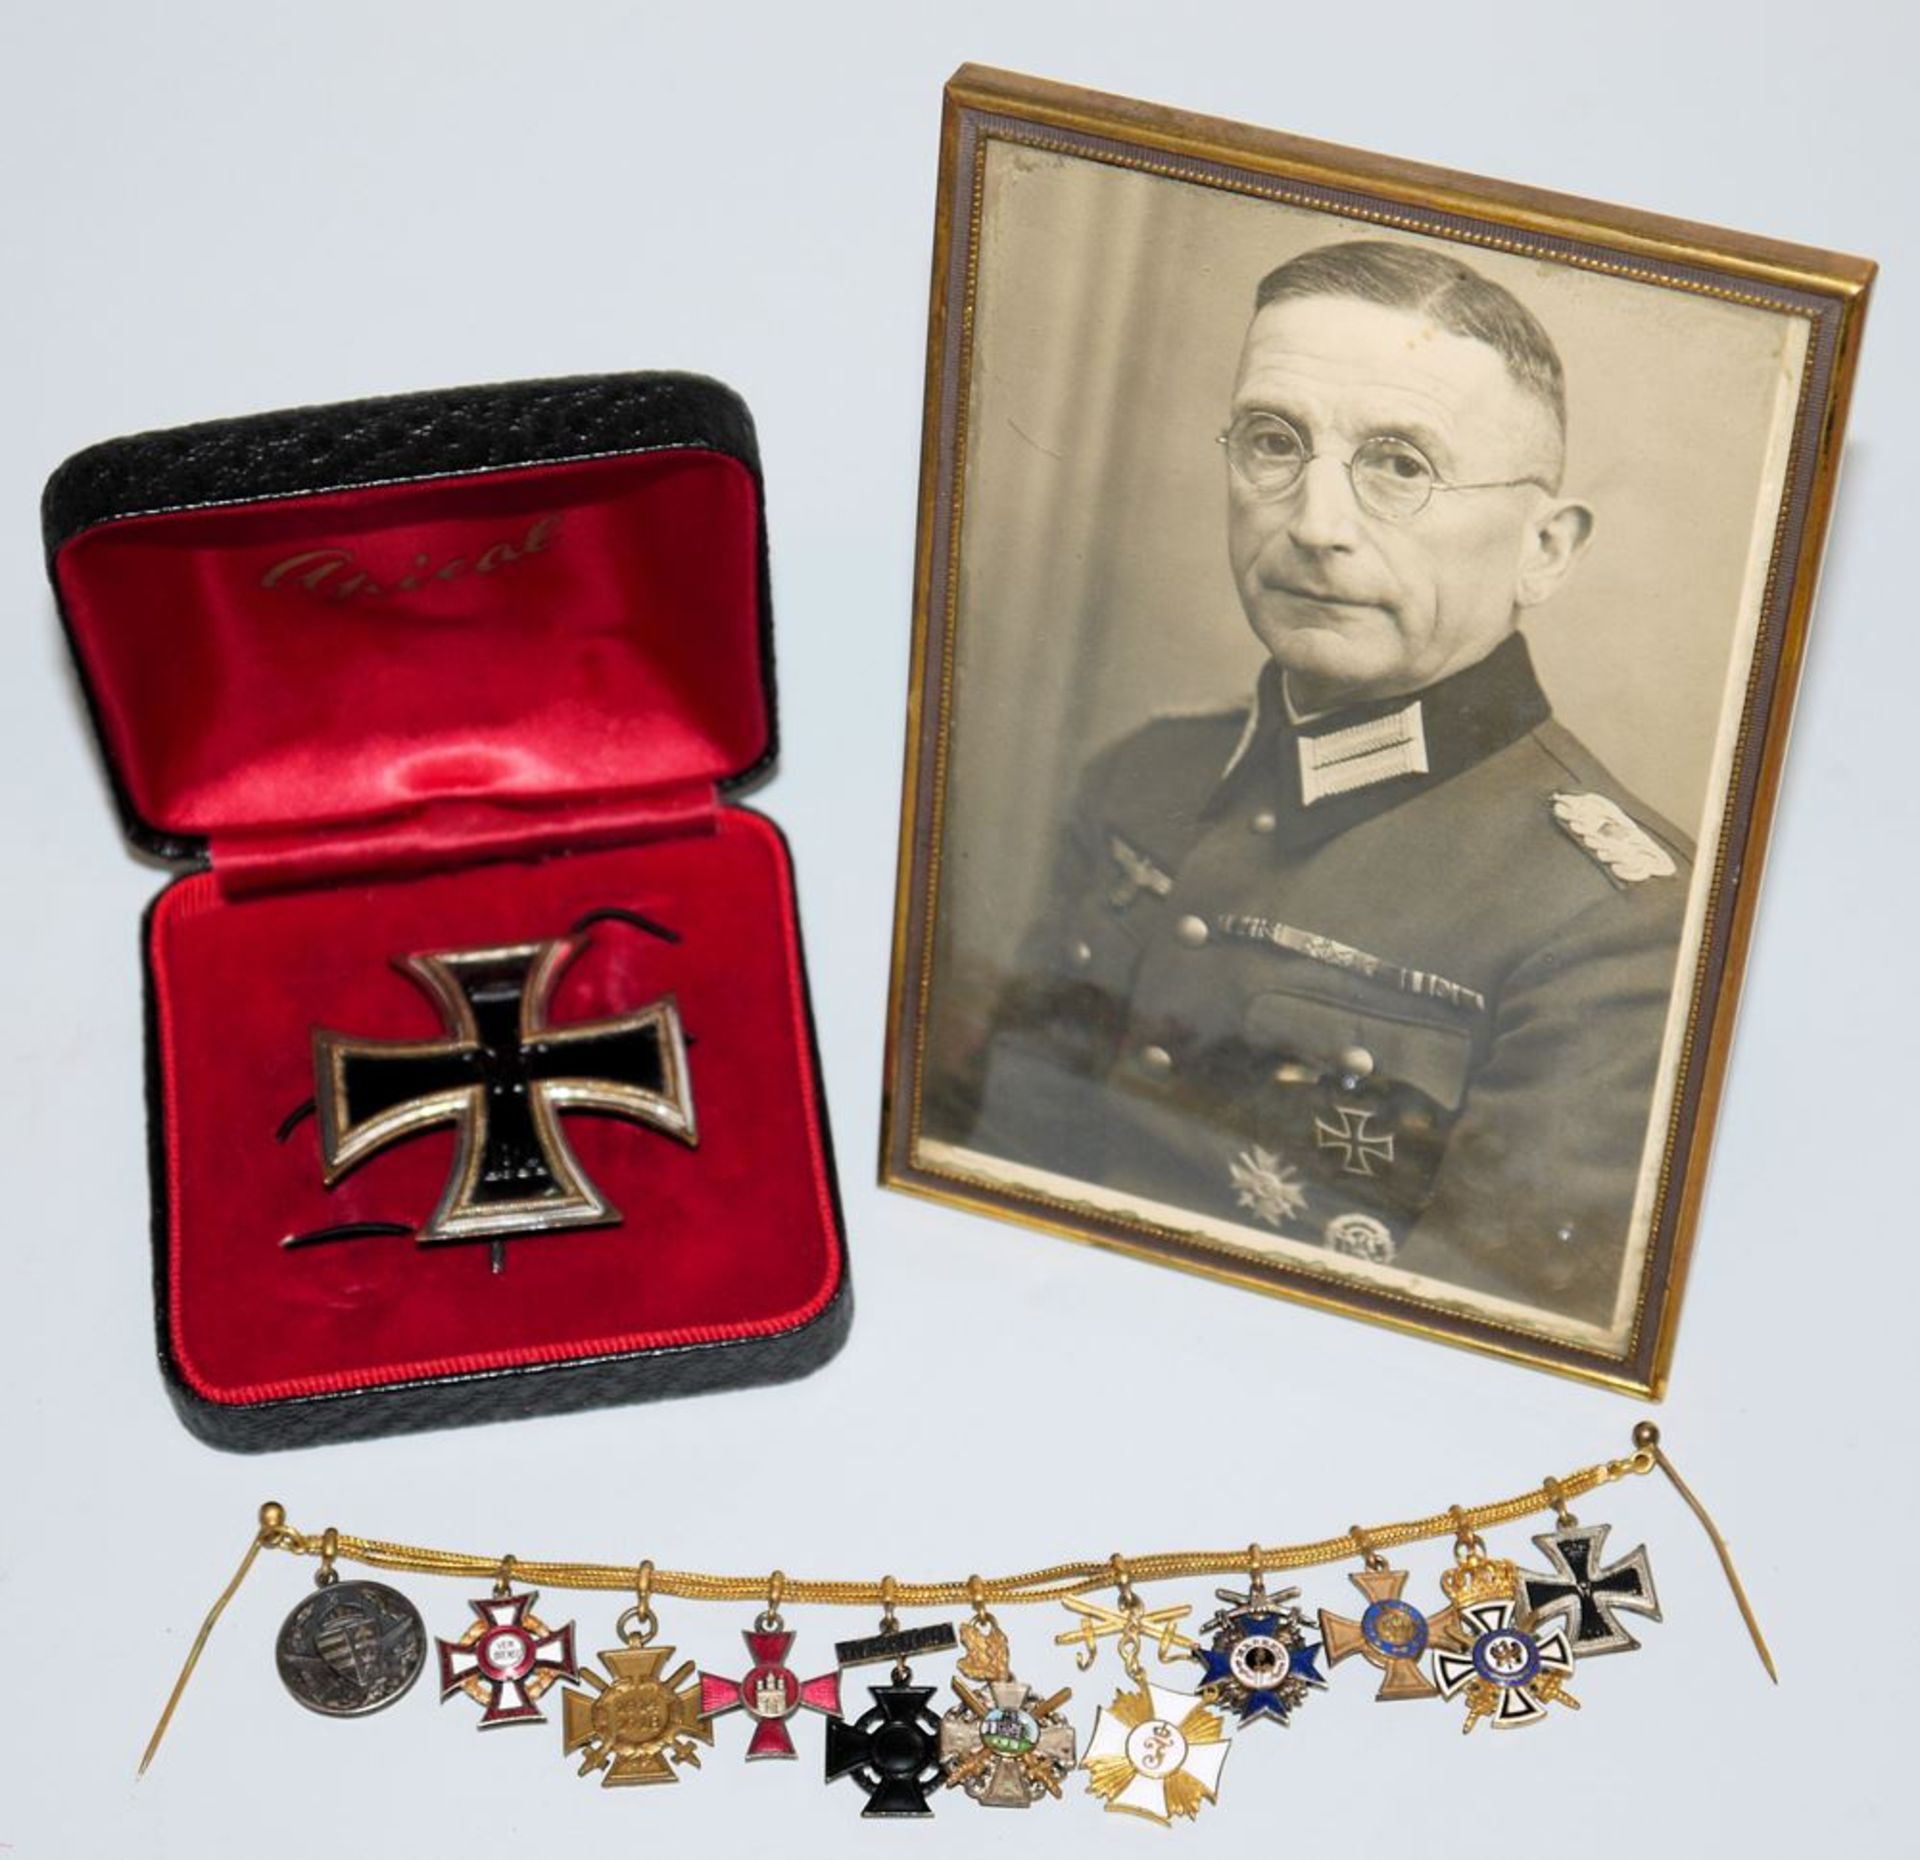 Officer's estate of WW1 & WW2 with large miniature medal chain, EK1 and photographs